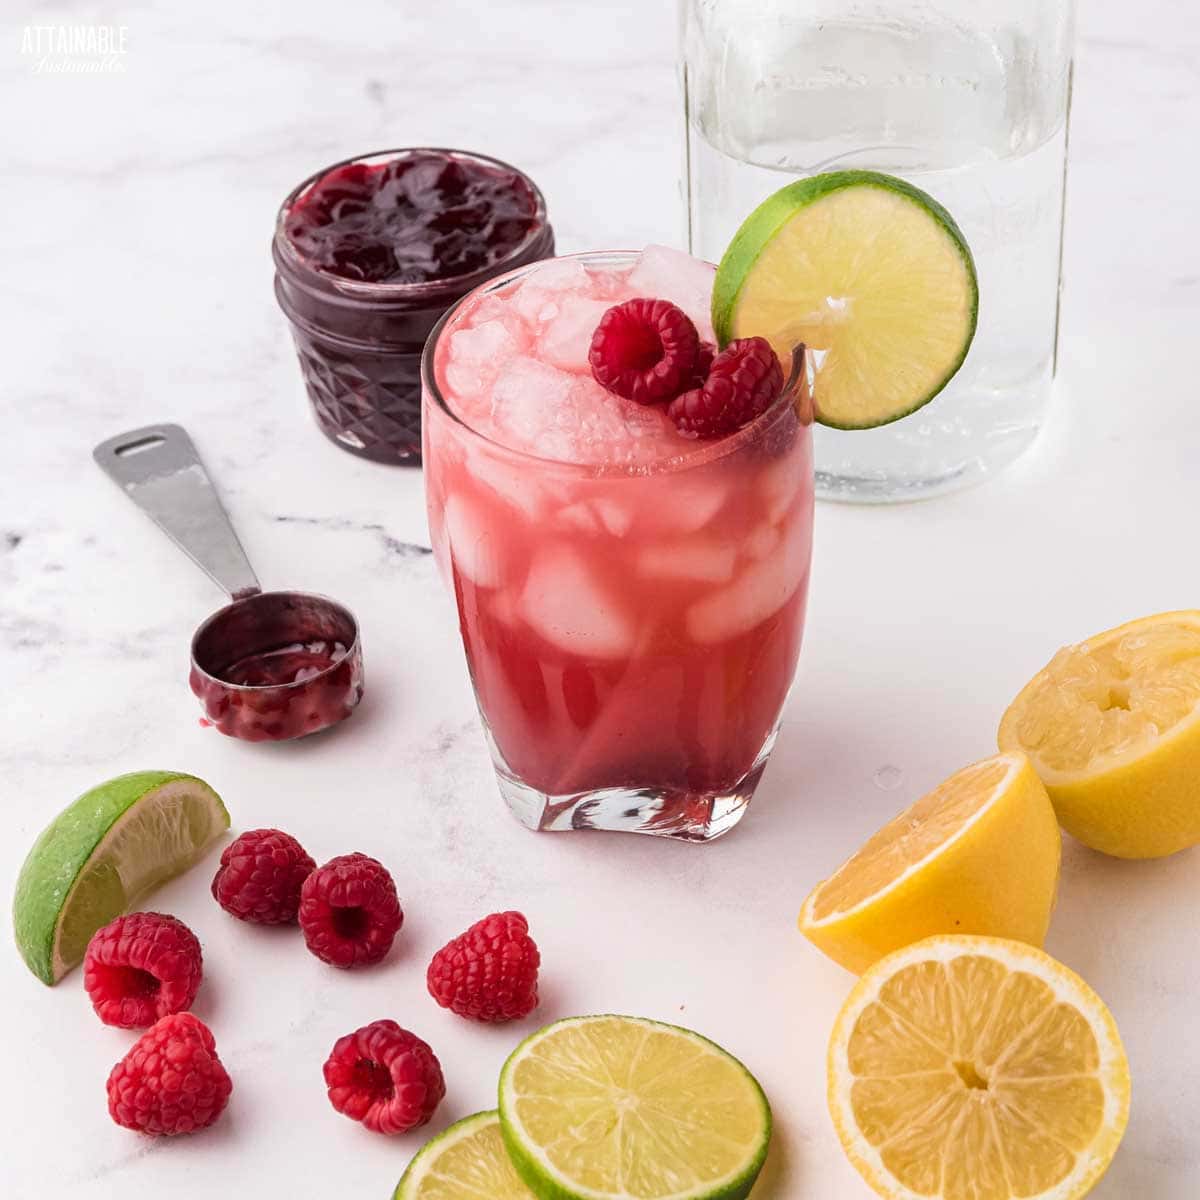 glass of red drink amid fresh limes, lemons, berries.